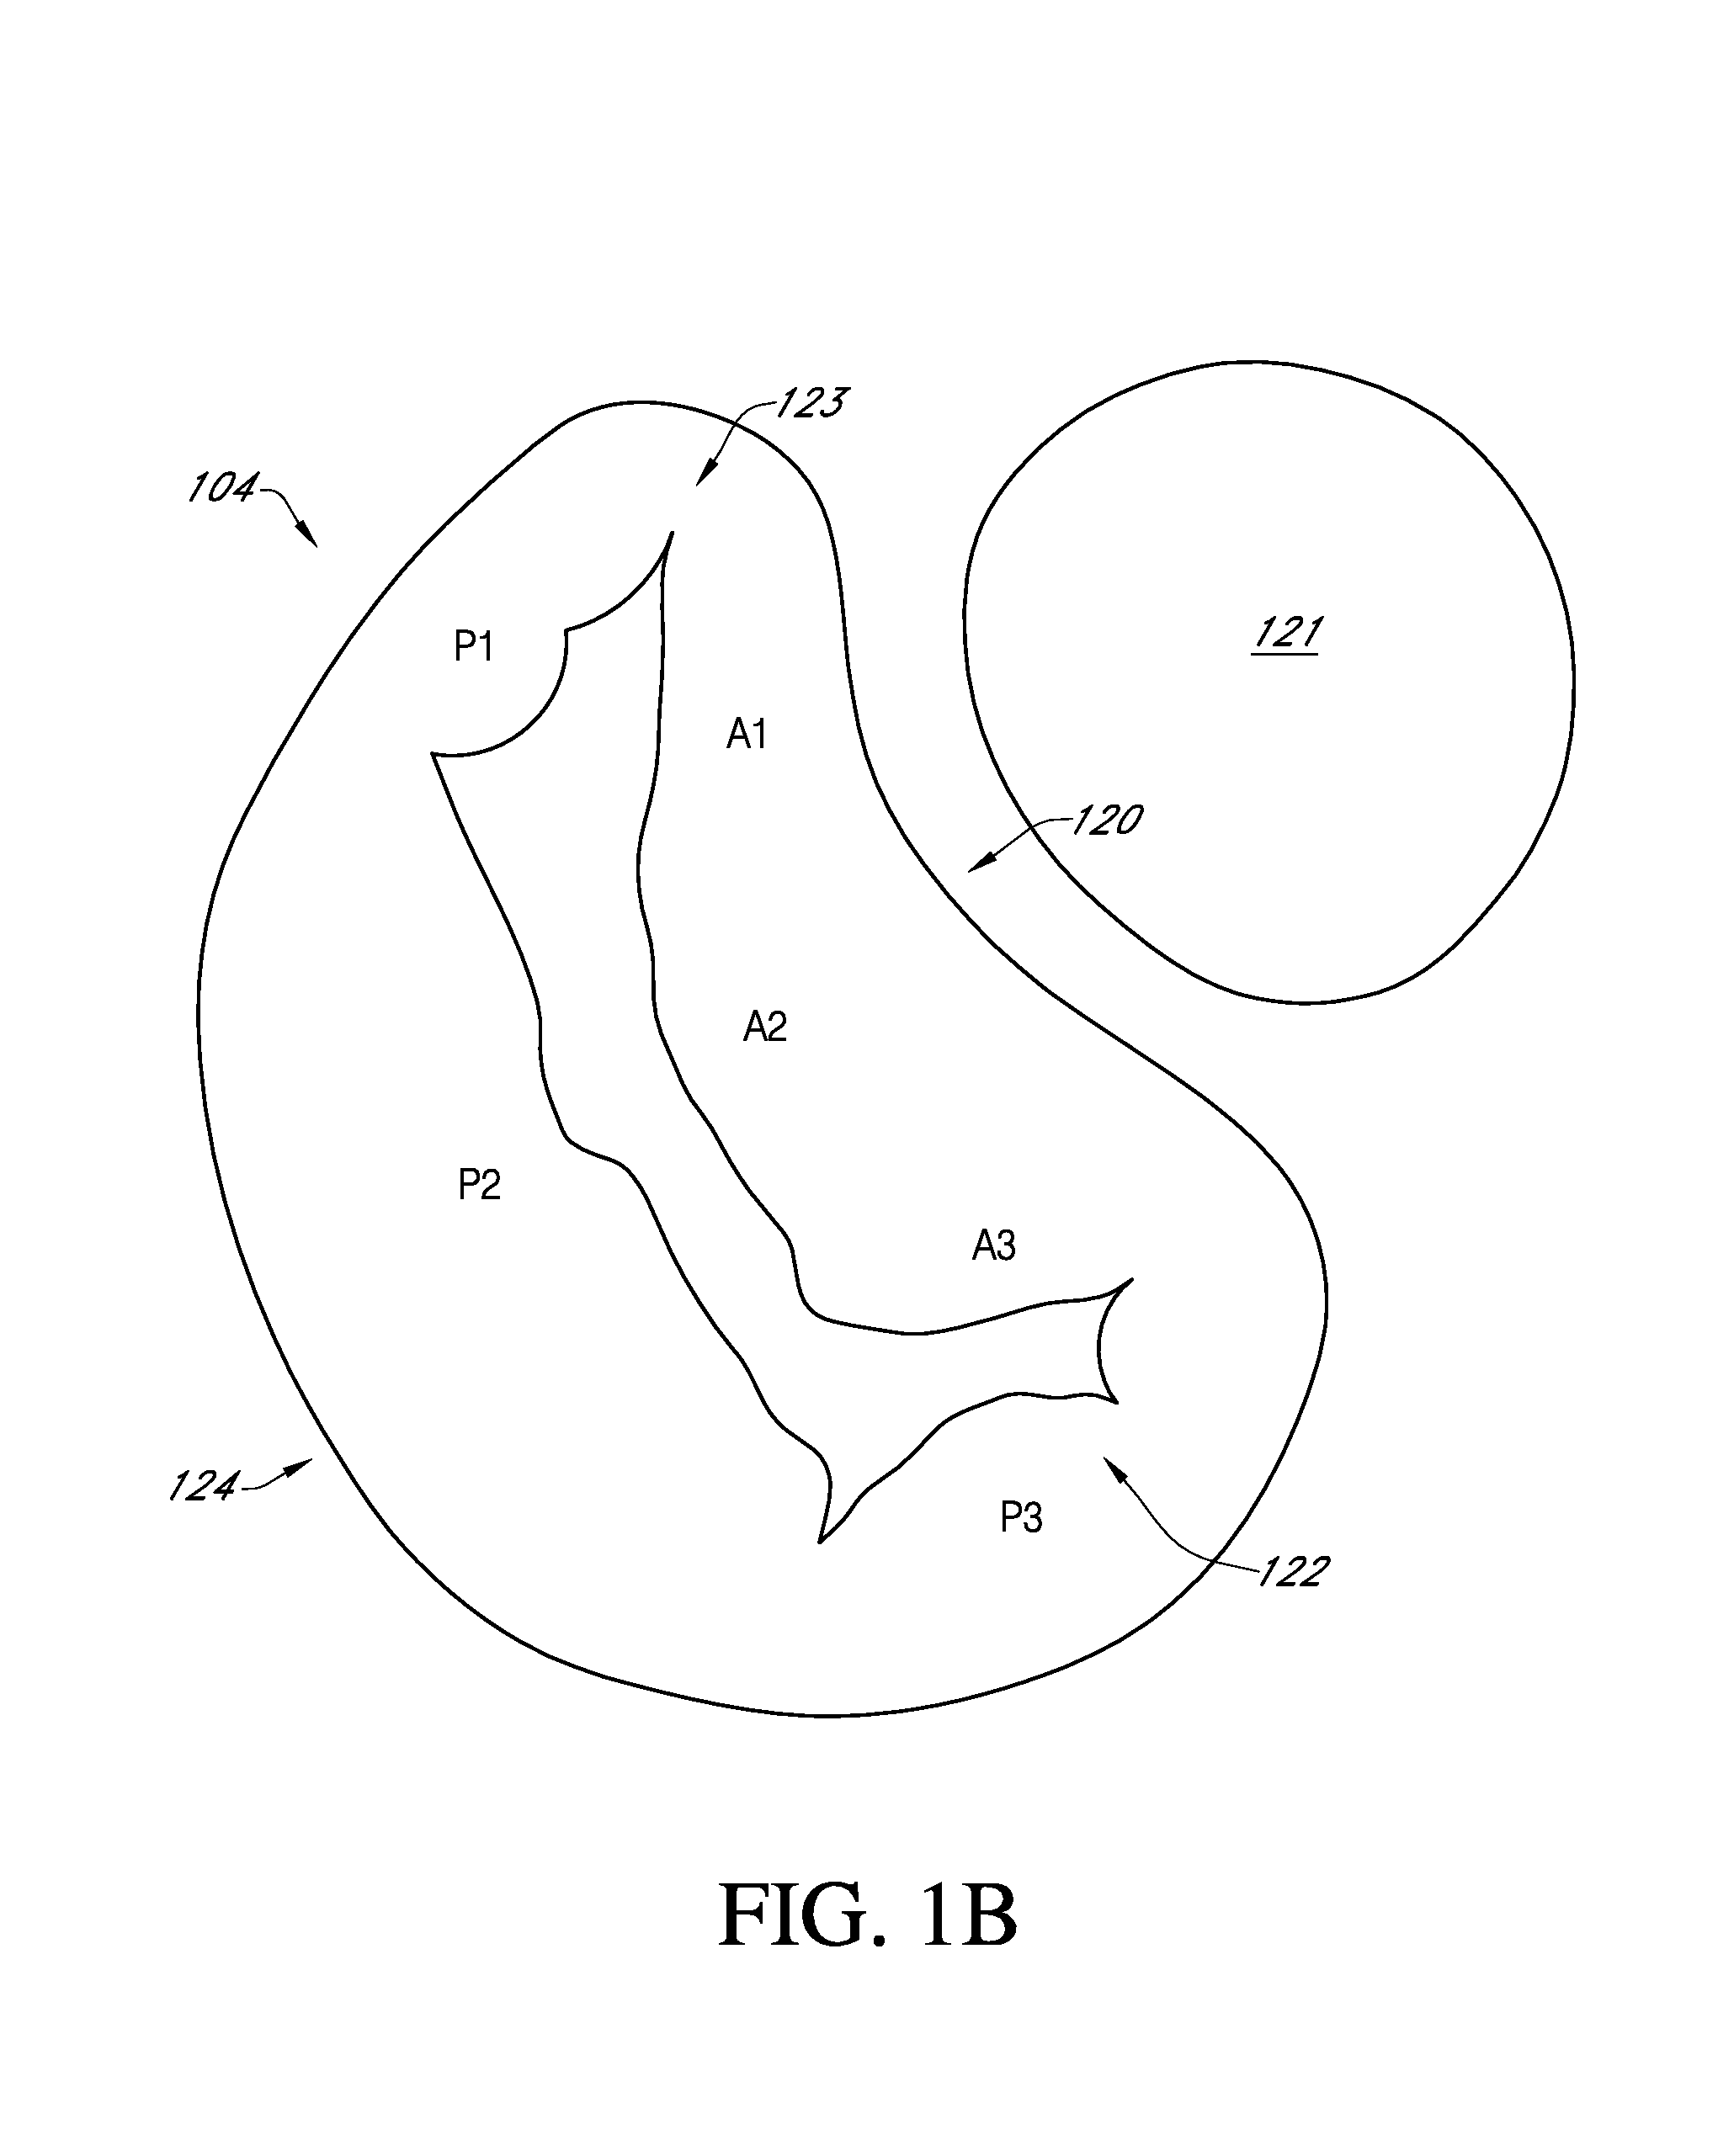 Method of reconfiguring a mitral valve annulus